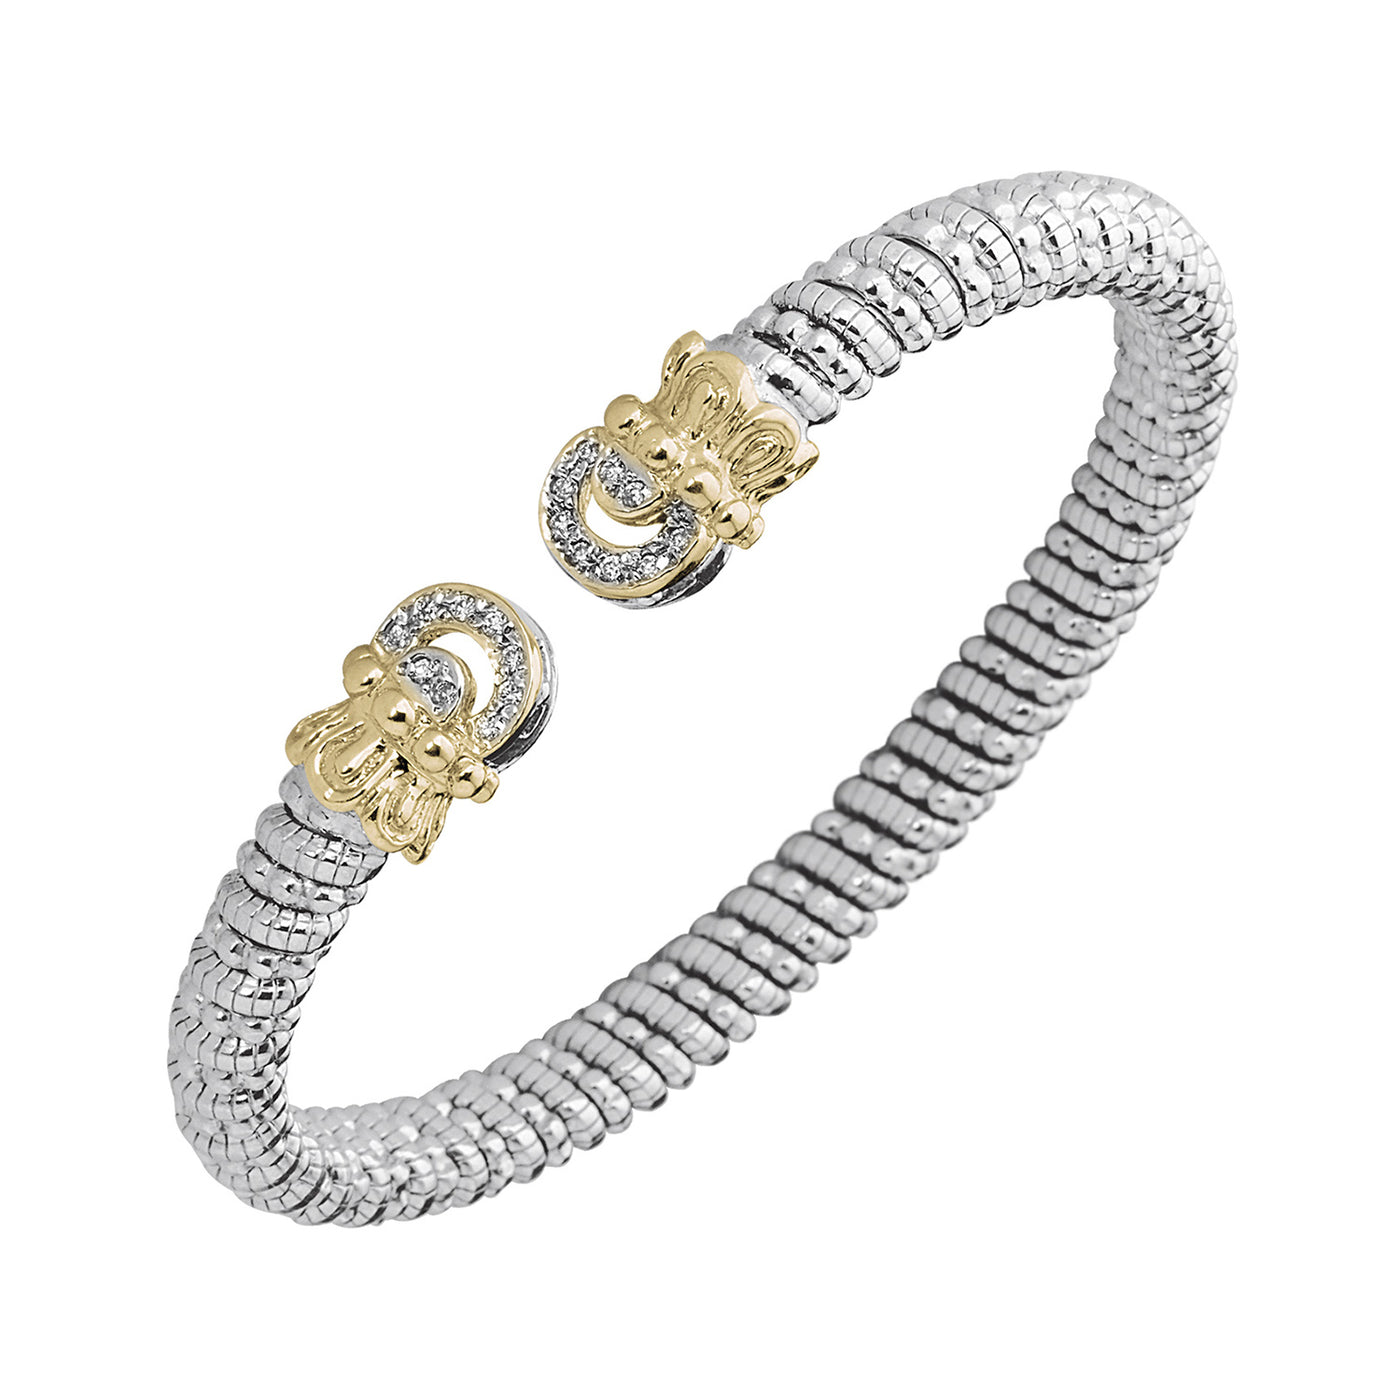 Vahan Sterling Silver and 14k Yellow Gold Moiré Beaded® Cuff Bracelet with Diamonds – 22073D06